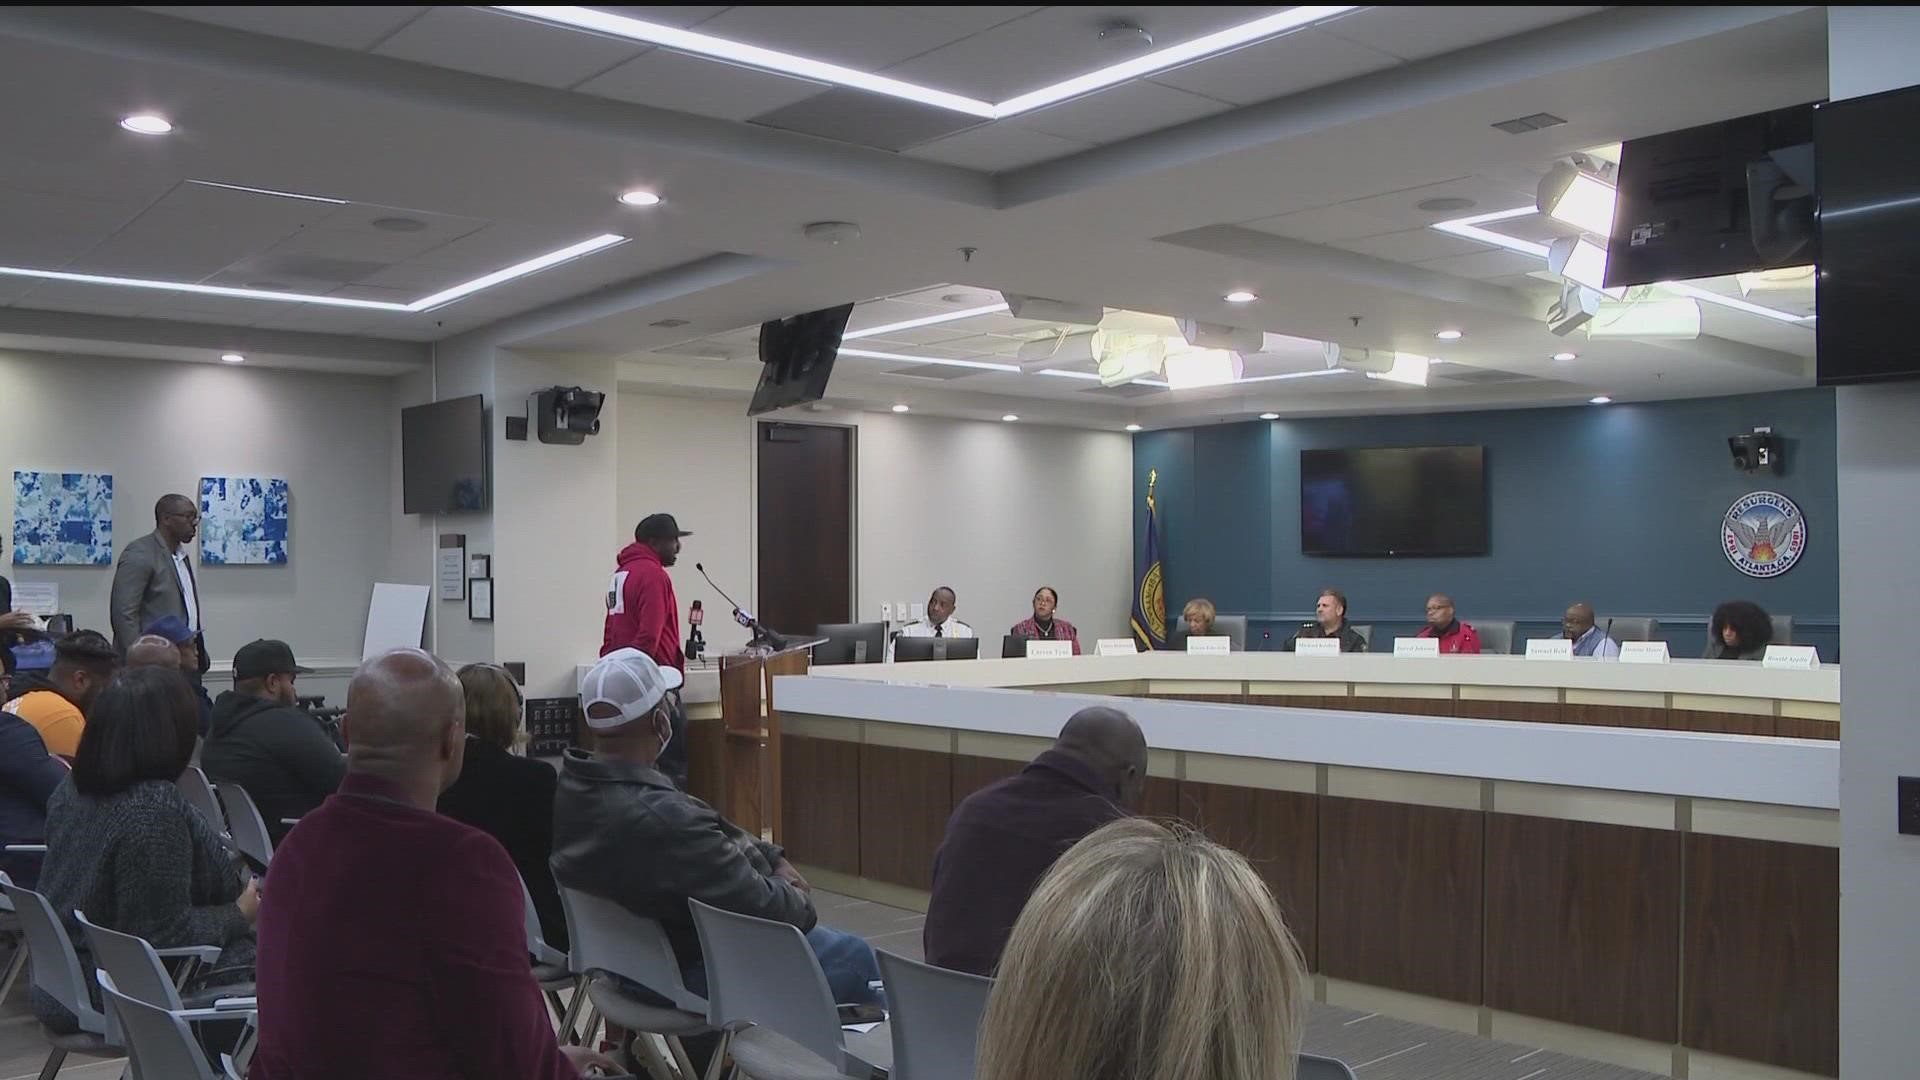 Dozens of people turned up for a special-called meeting on youth violence Tuesday evening by the Atlanta Public Safety Commission.